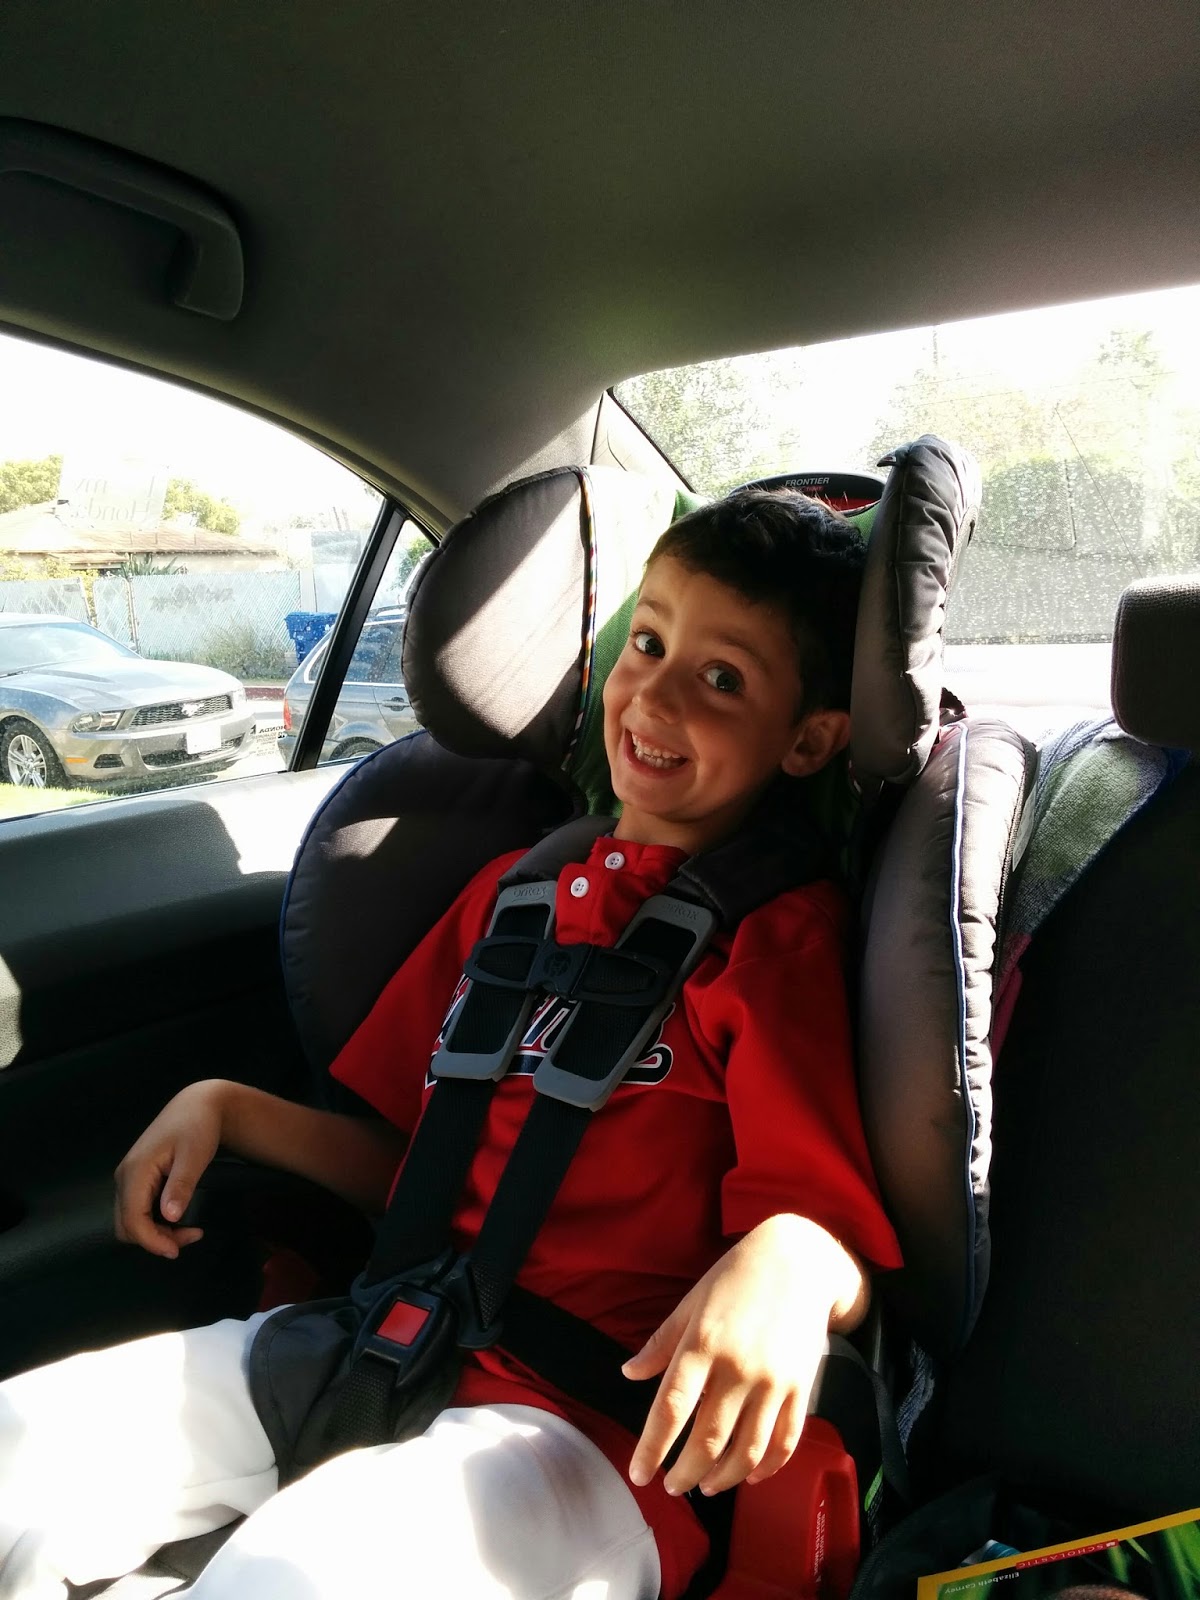 Does A 7 Year Old Need Car Seat, What Car Seat Should A 7 Year Old Use